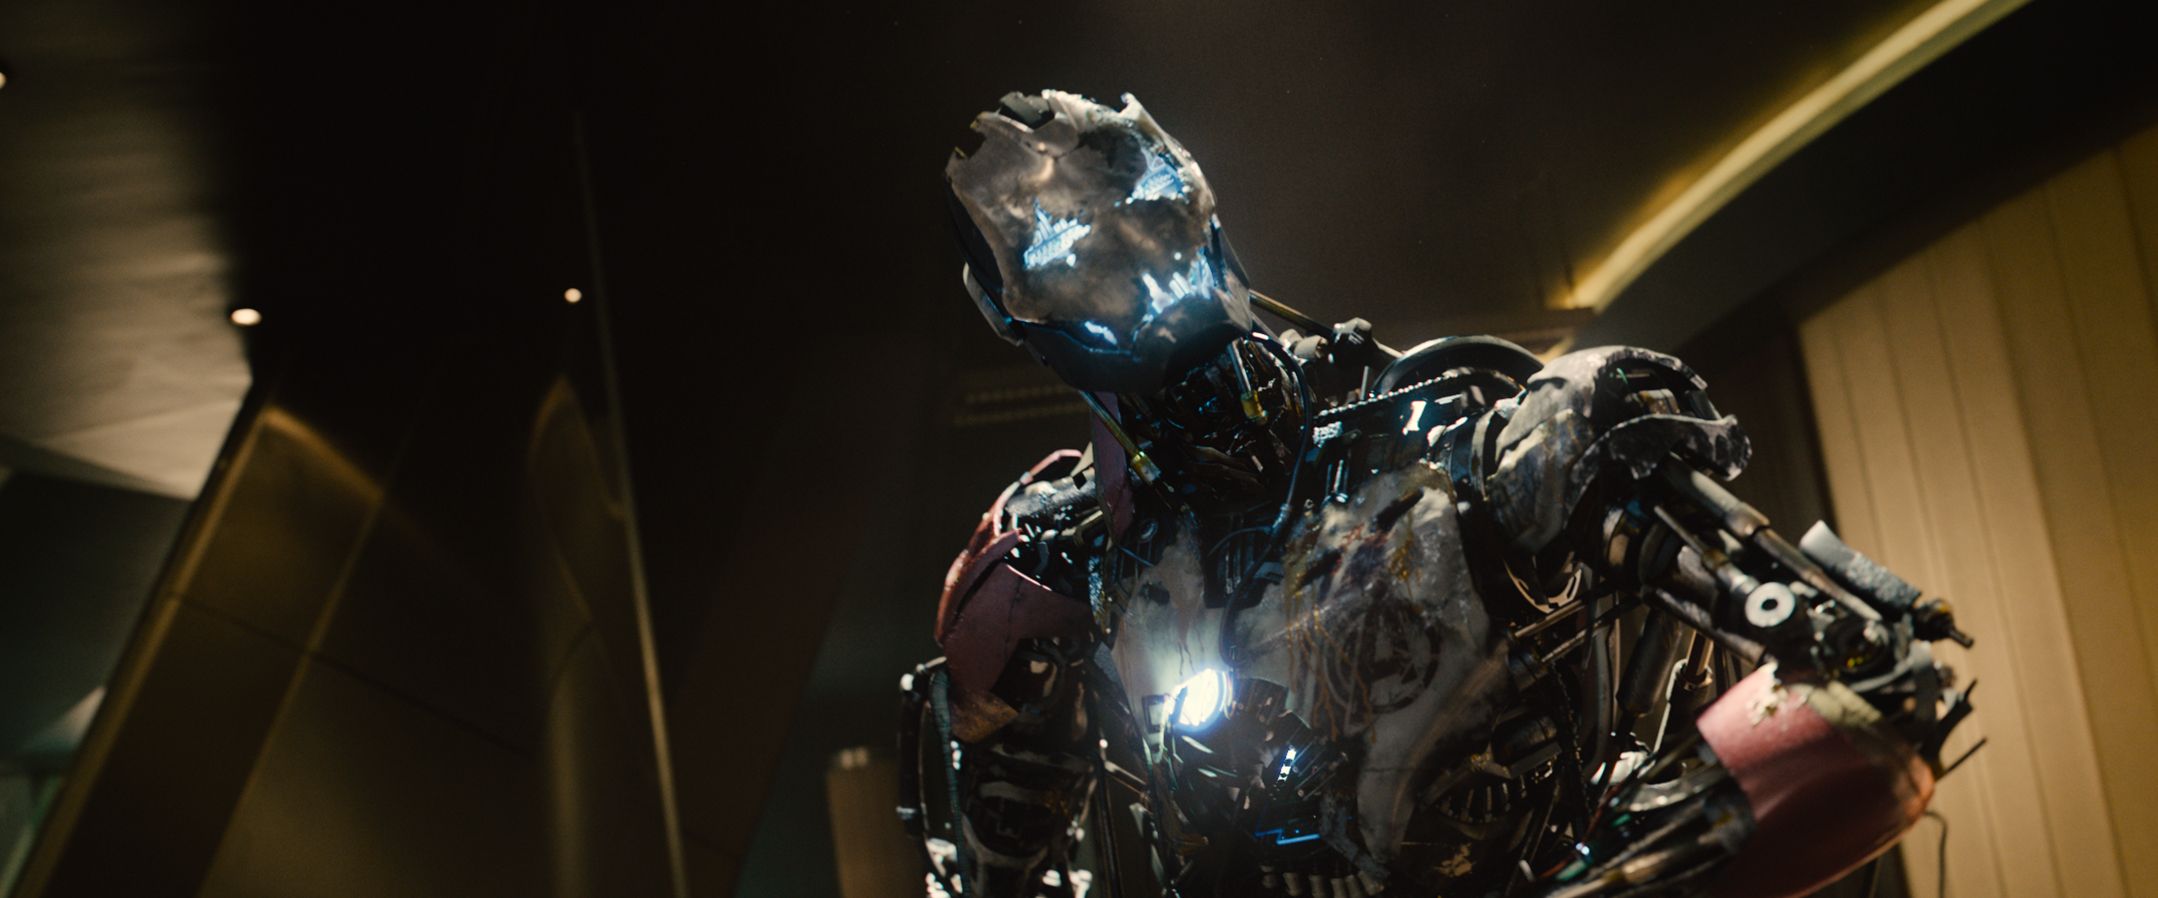 The Avengers Age of Ultron Photo 6